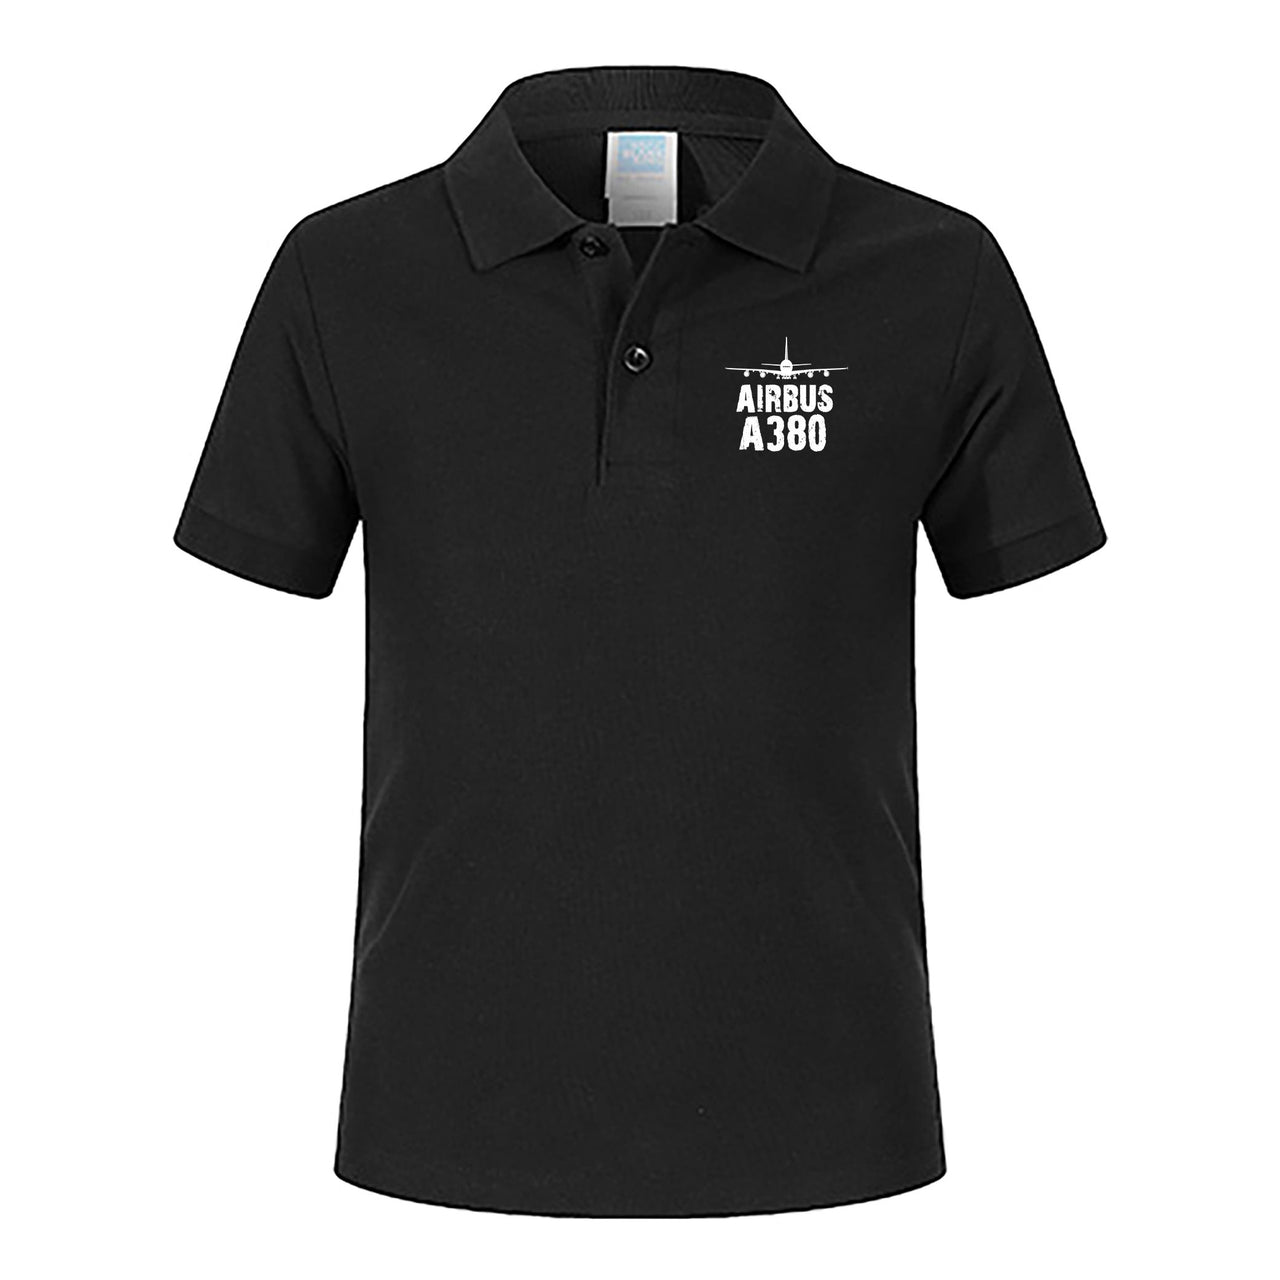 Airbus A380 & Plane Designed Children Polo T-Shirts